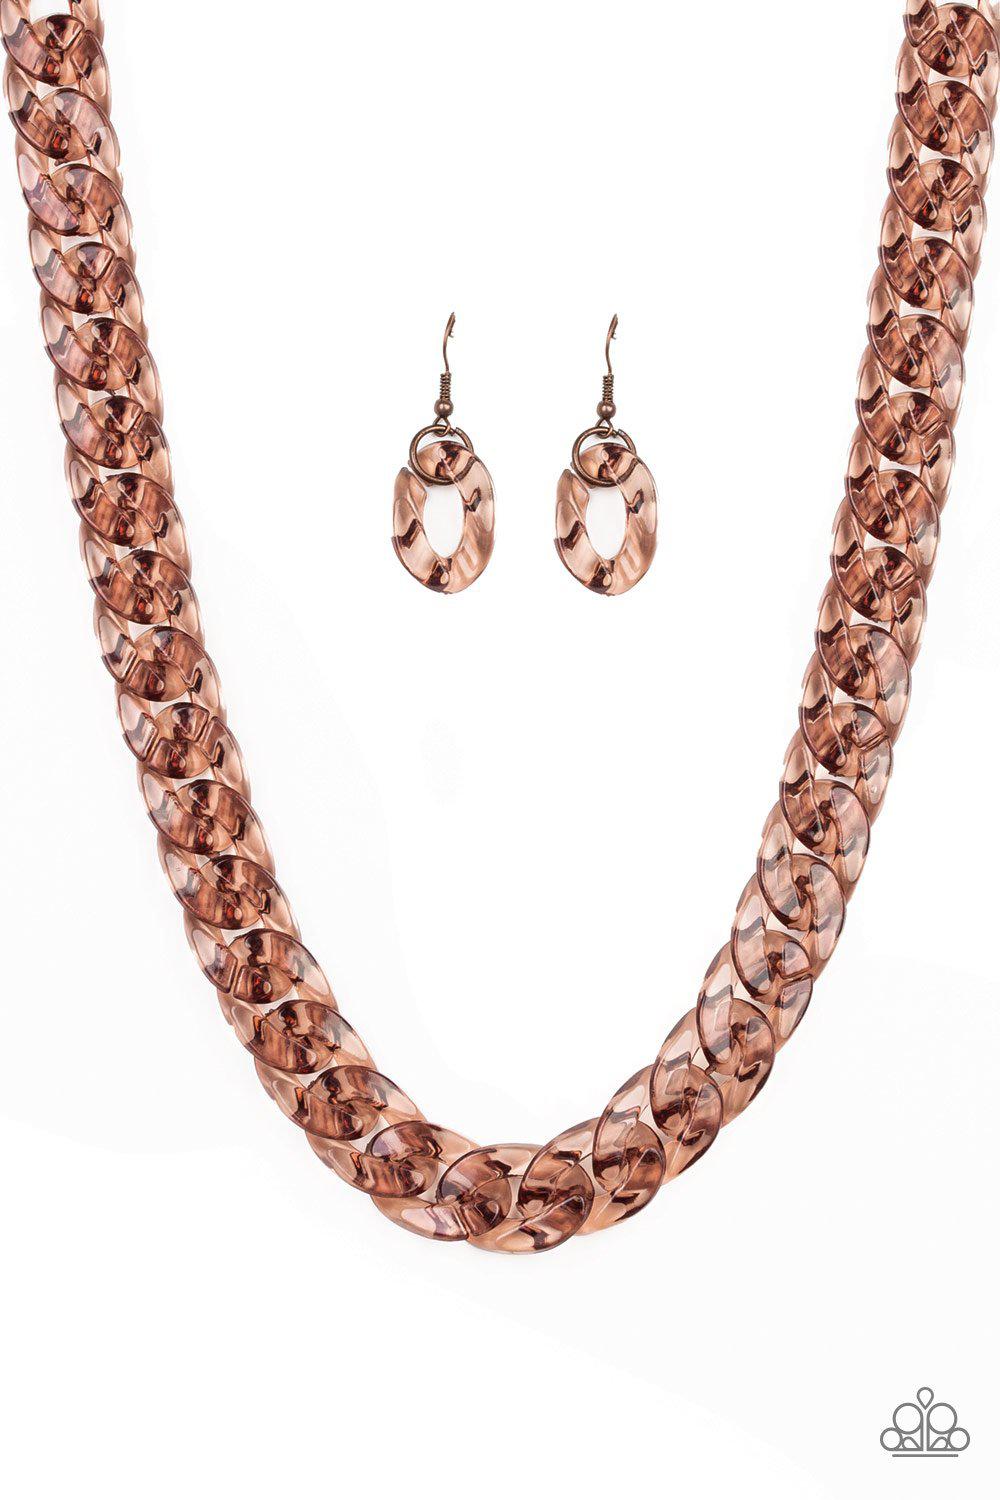 Put it on Ice Copper Acrylic Necklace and matching Earrings - Paparazzi Accessories-CarasShop.com - $5 Jewelry by Cara Jewels